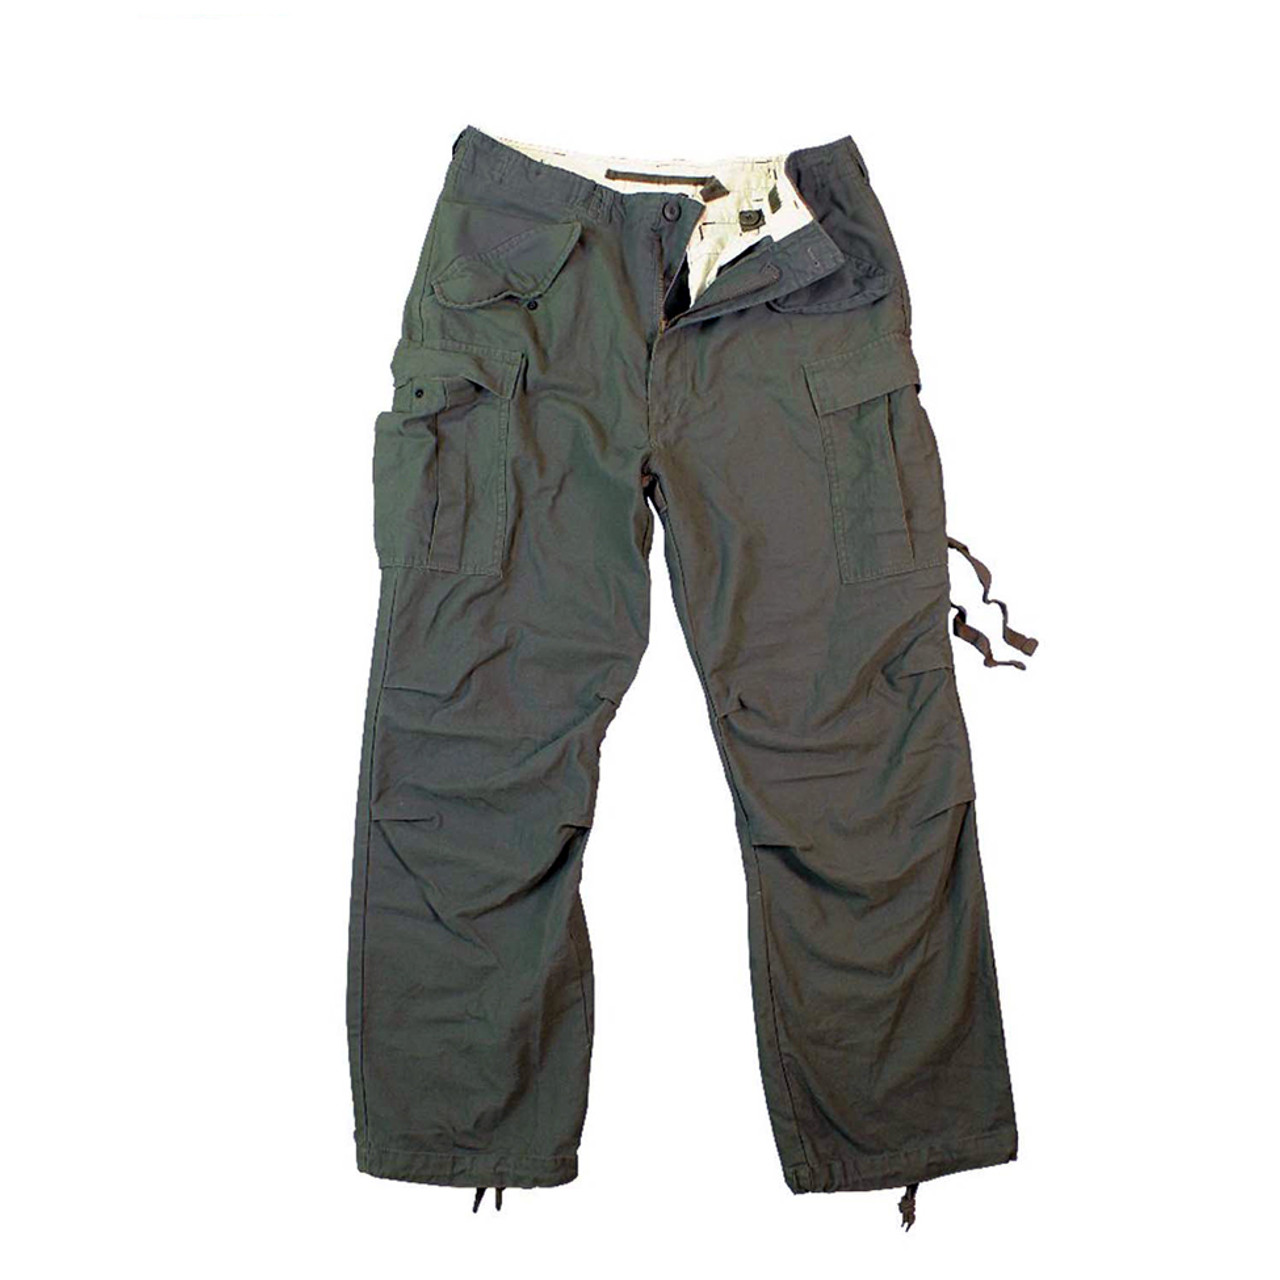 US OD NYCO M65 FIELD PANTS OD, Apparel \ Pants \ Field Pants  , Army Navy Surplus - Tactical, Big variety - Cheap  prices